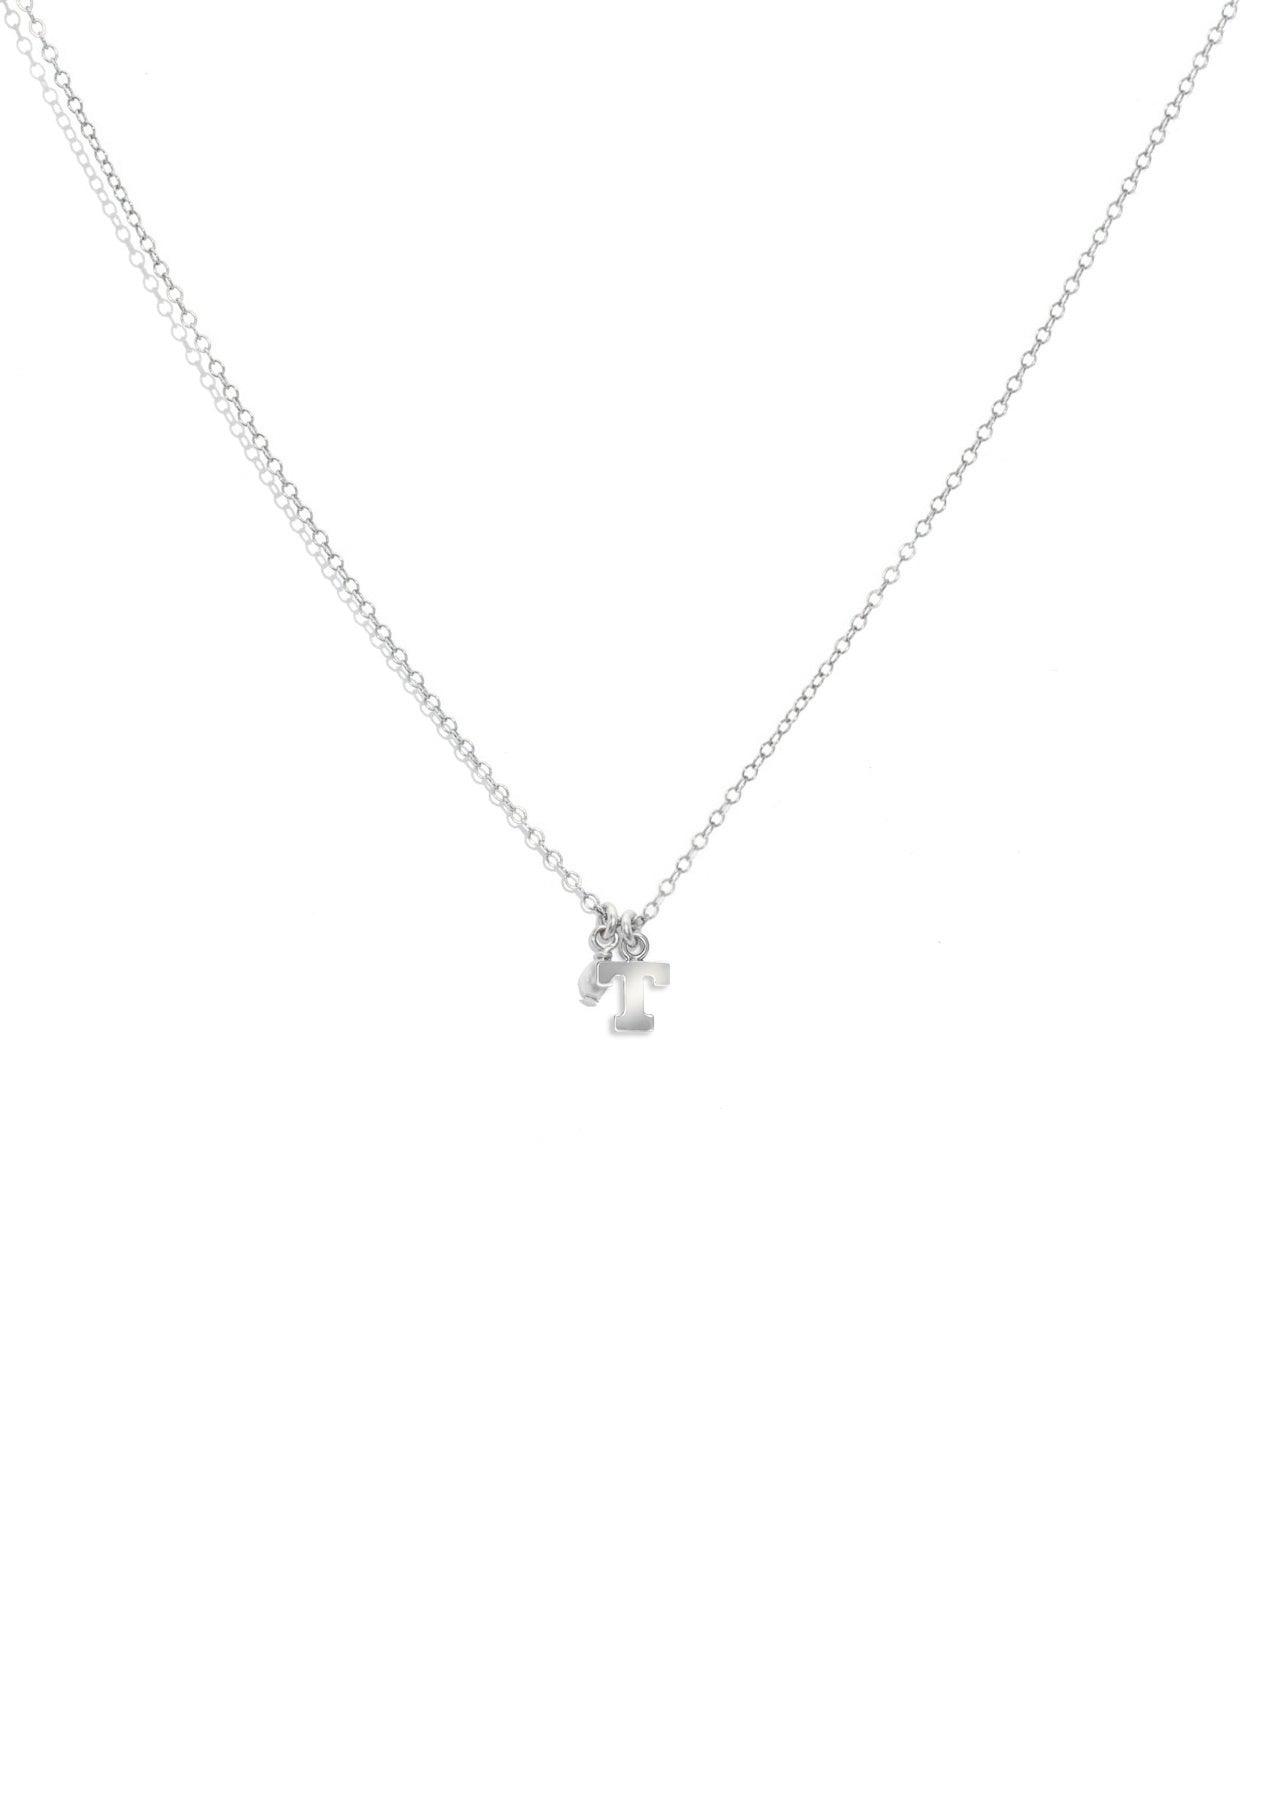 The Silver Initial Charm Necklace